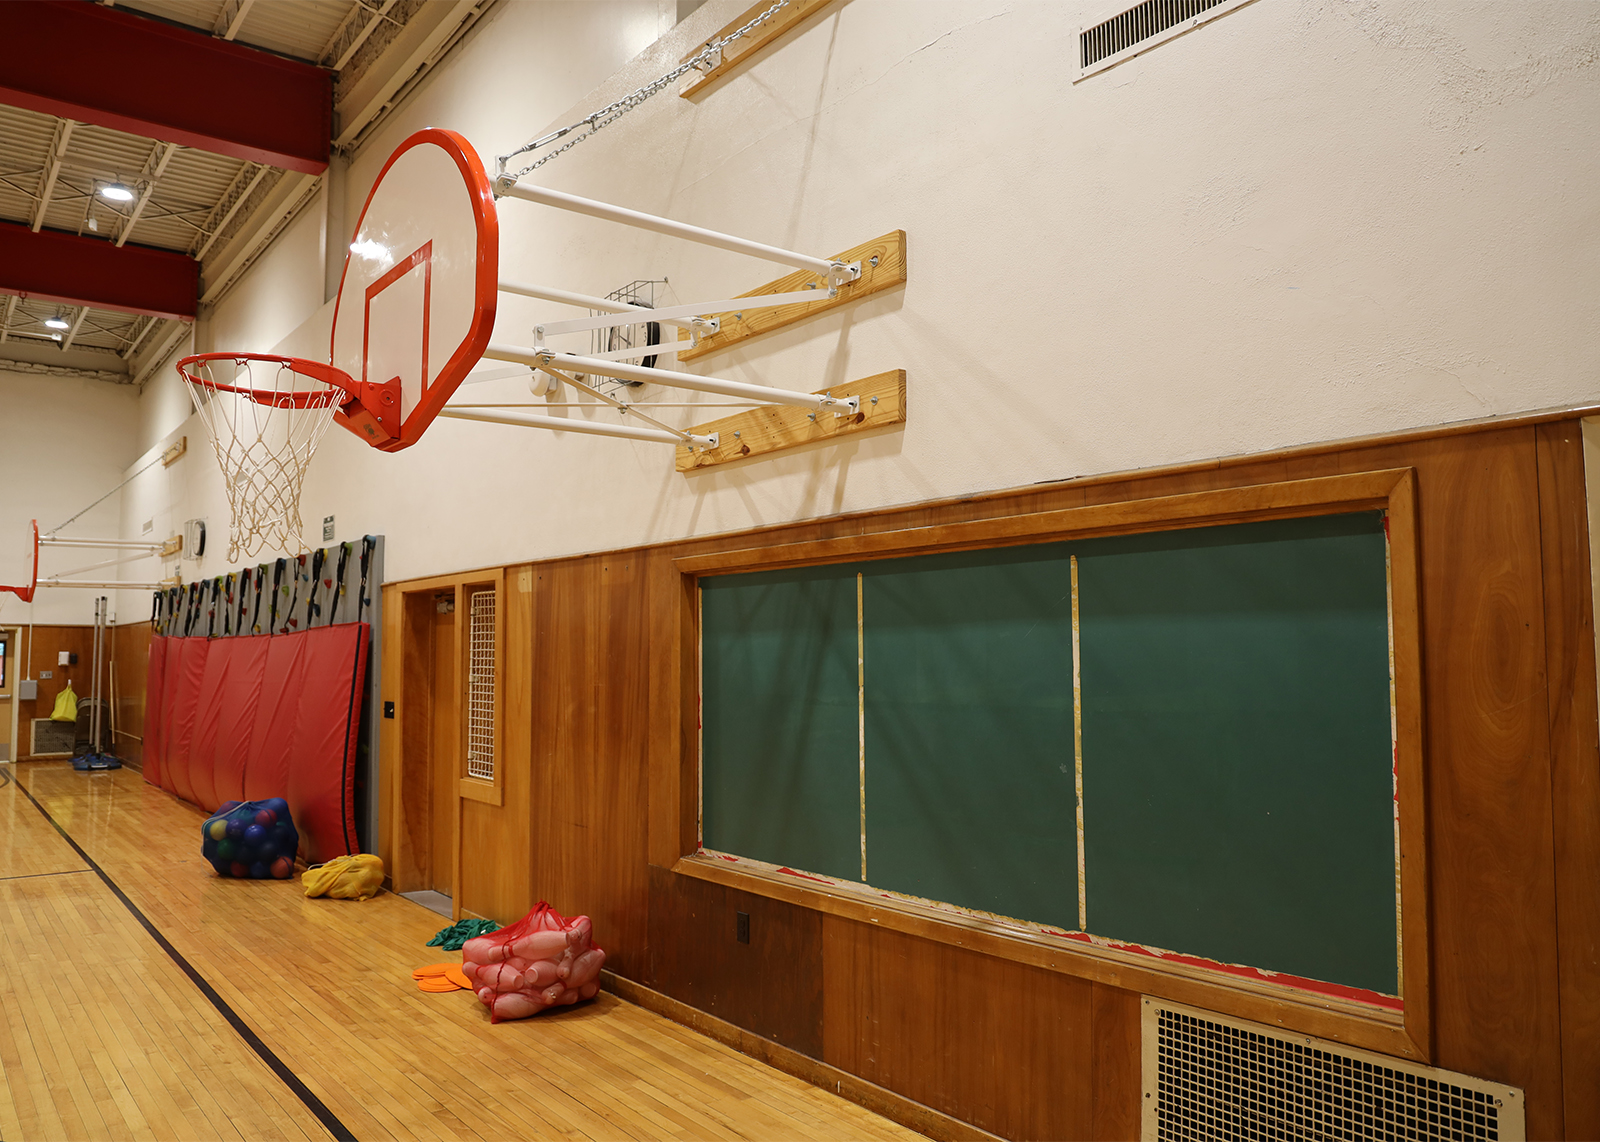 outdated gymnasium with basketball hoop and chalkboard